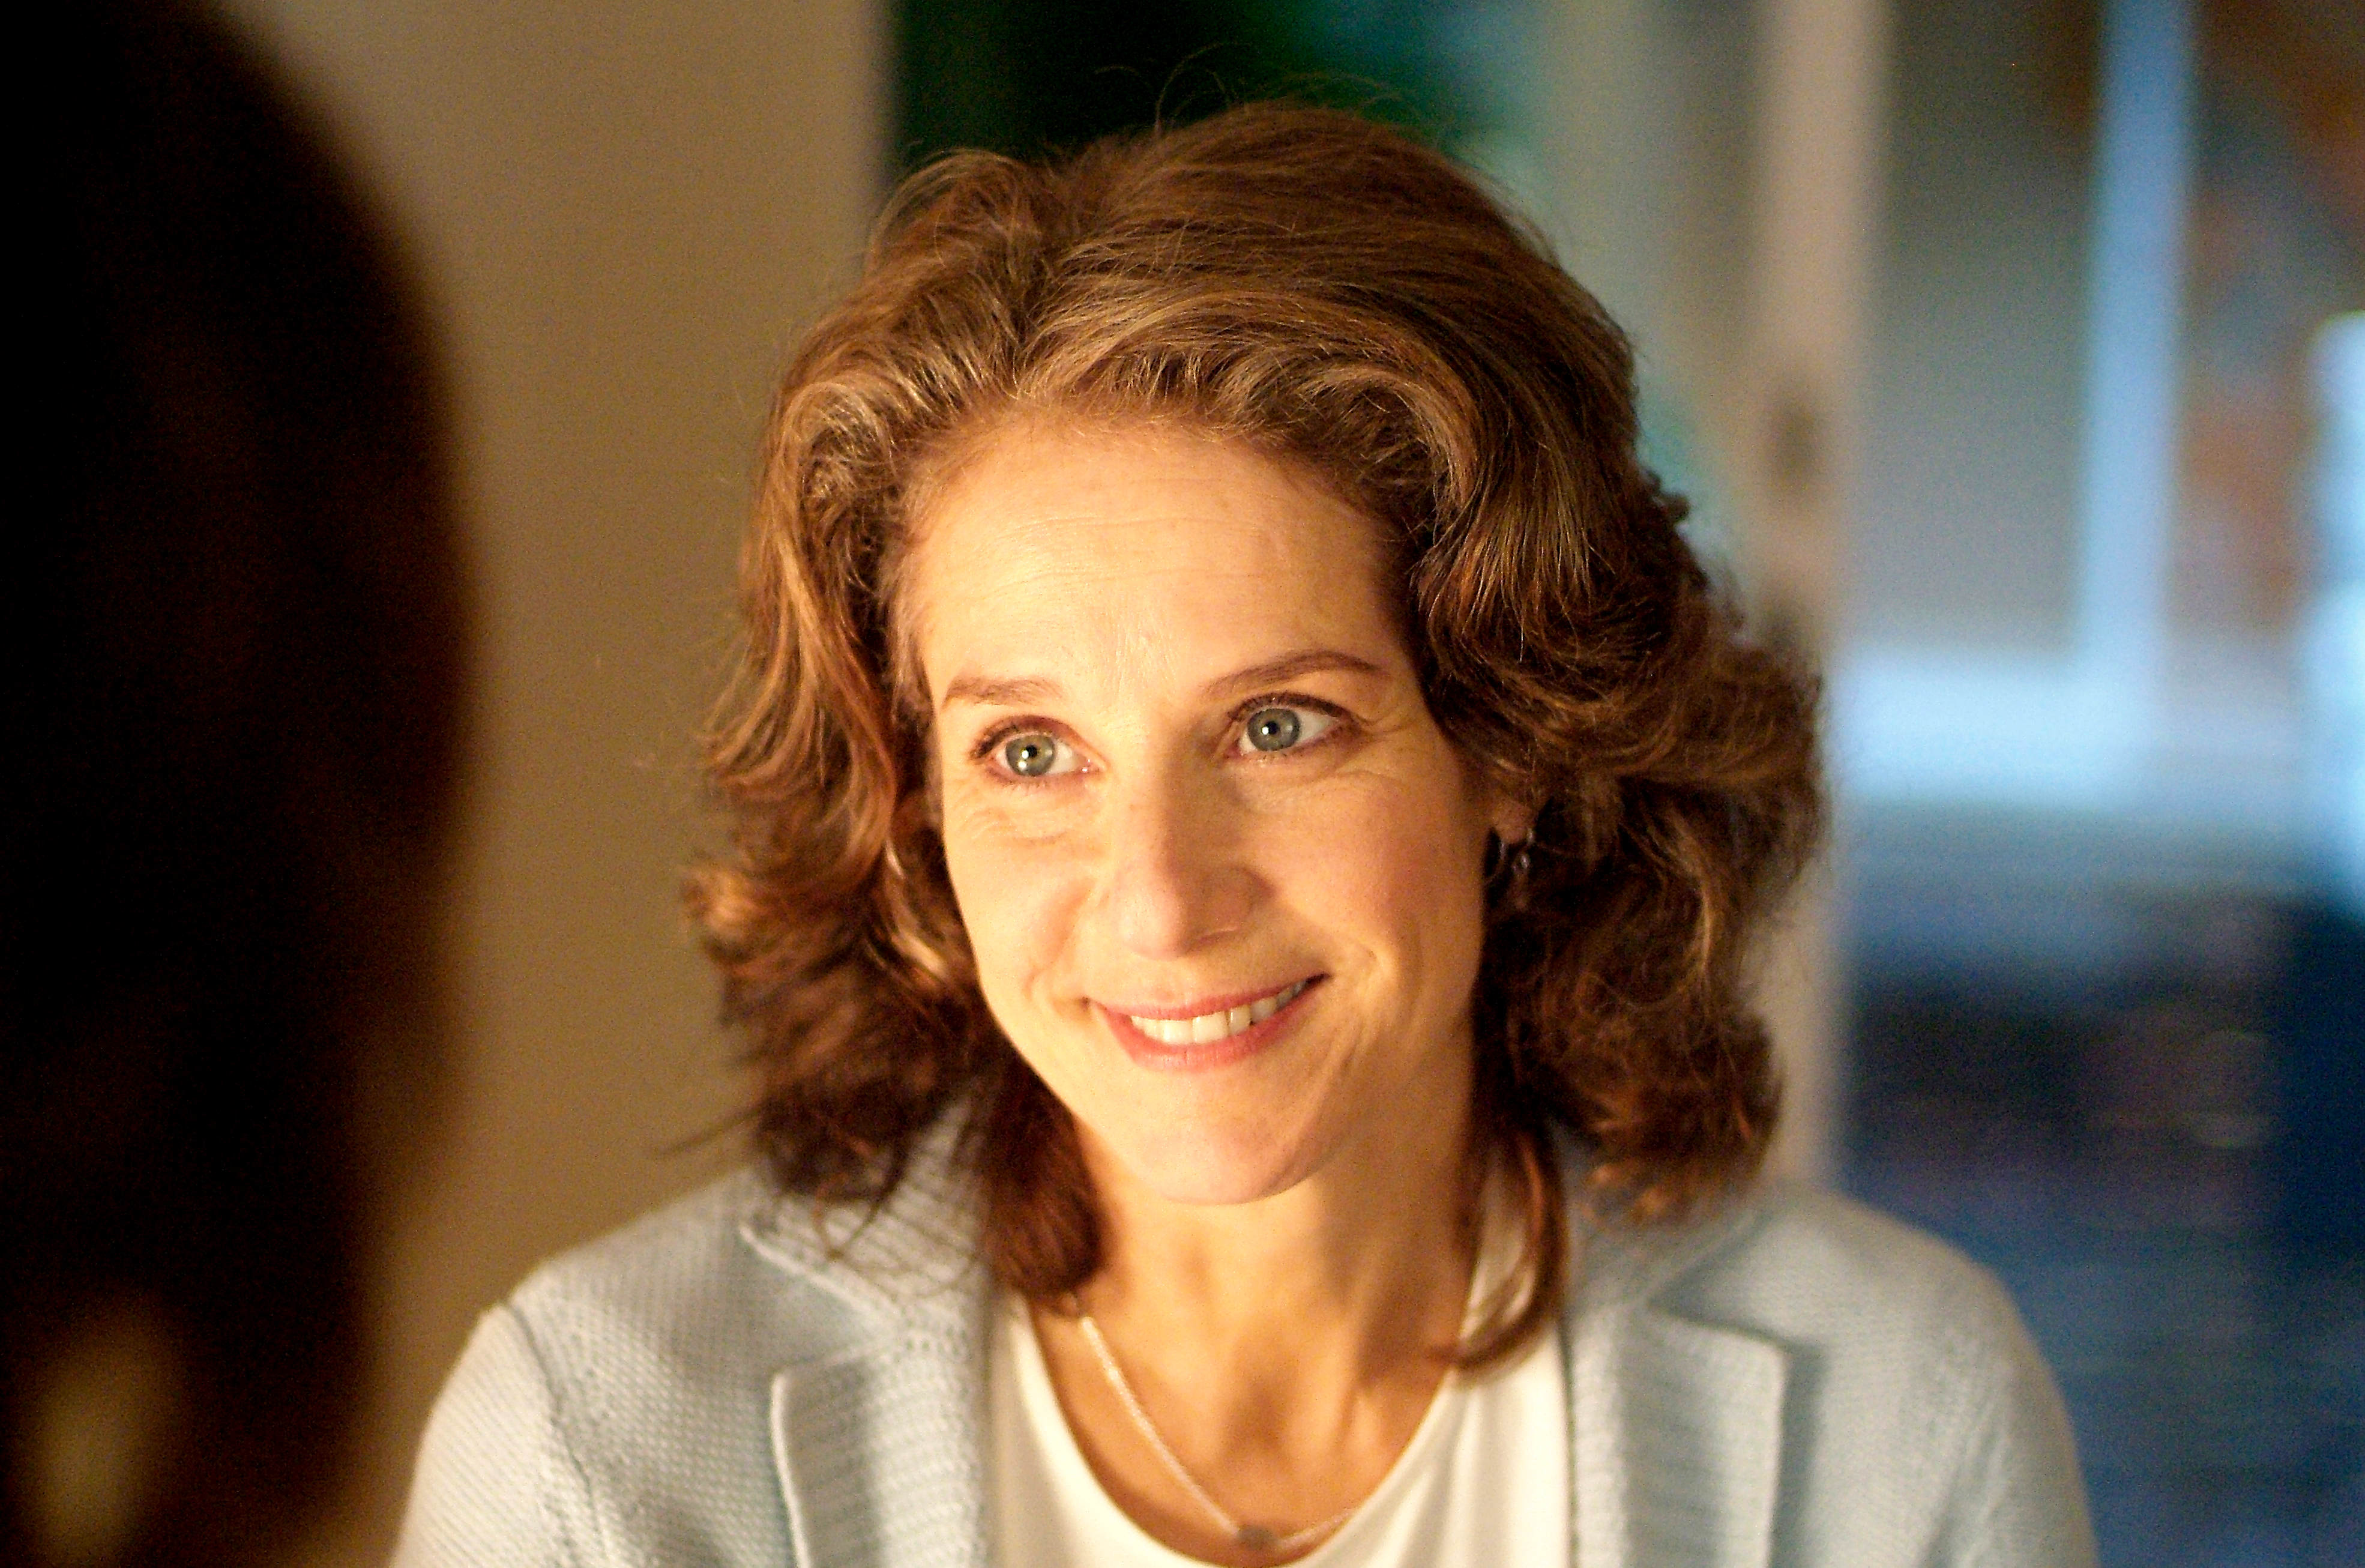 Debra Winger as Abby in Sony Pictures Classics' Rachel Getting Married (2008). Photo by Bob Vergara.